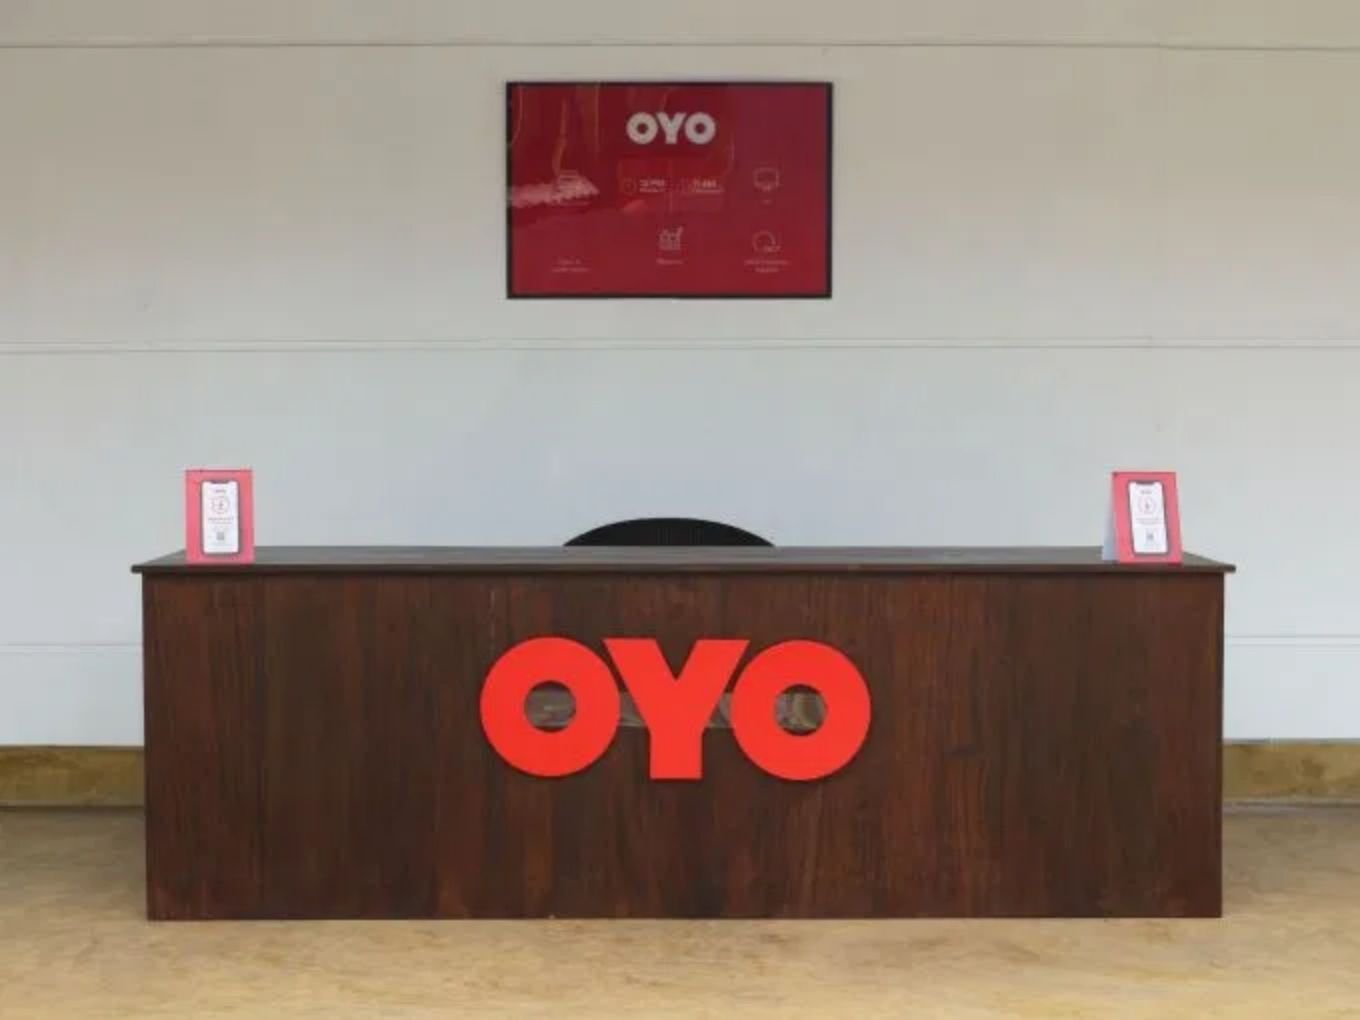 Oyo Lays Off 1200 Employees In India After Softbank's Pressure